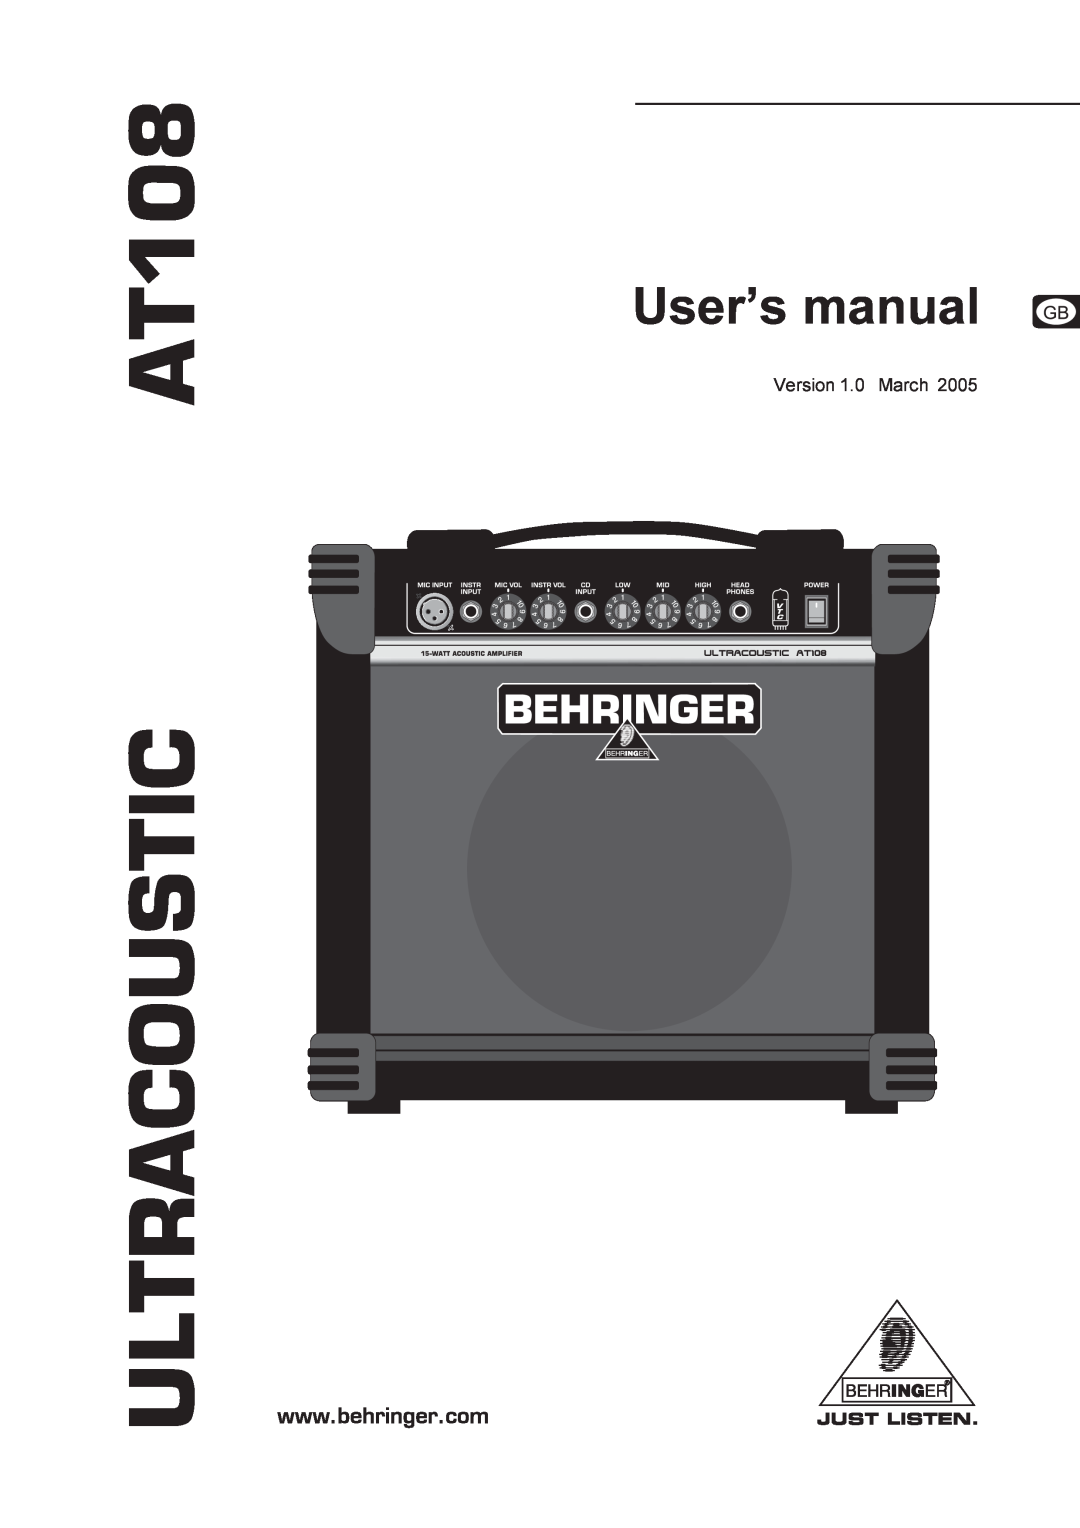 Behringer manual AT108 ULTRACOUSTIC 